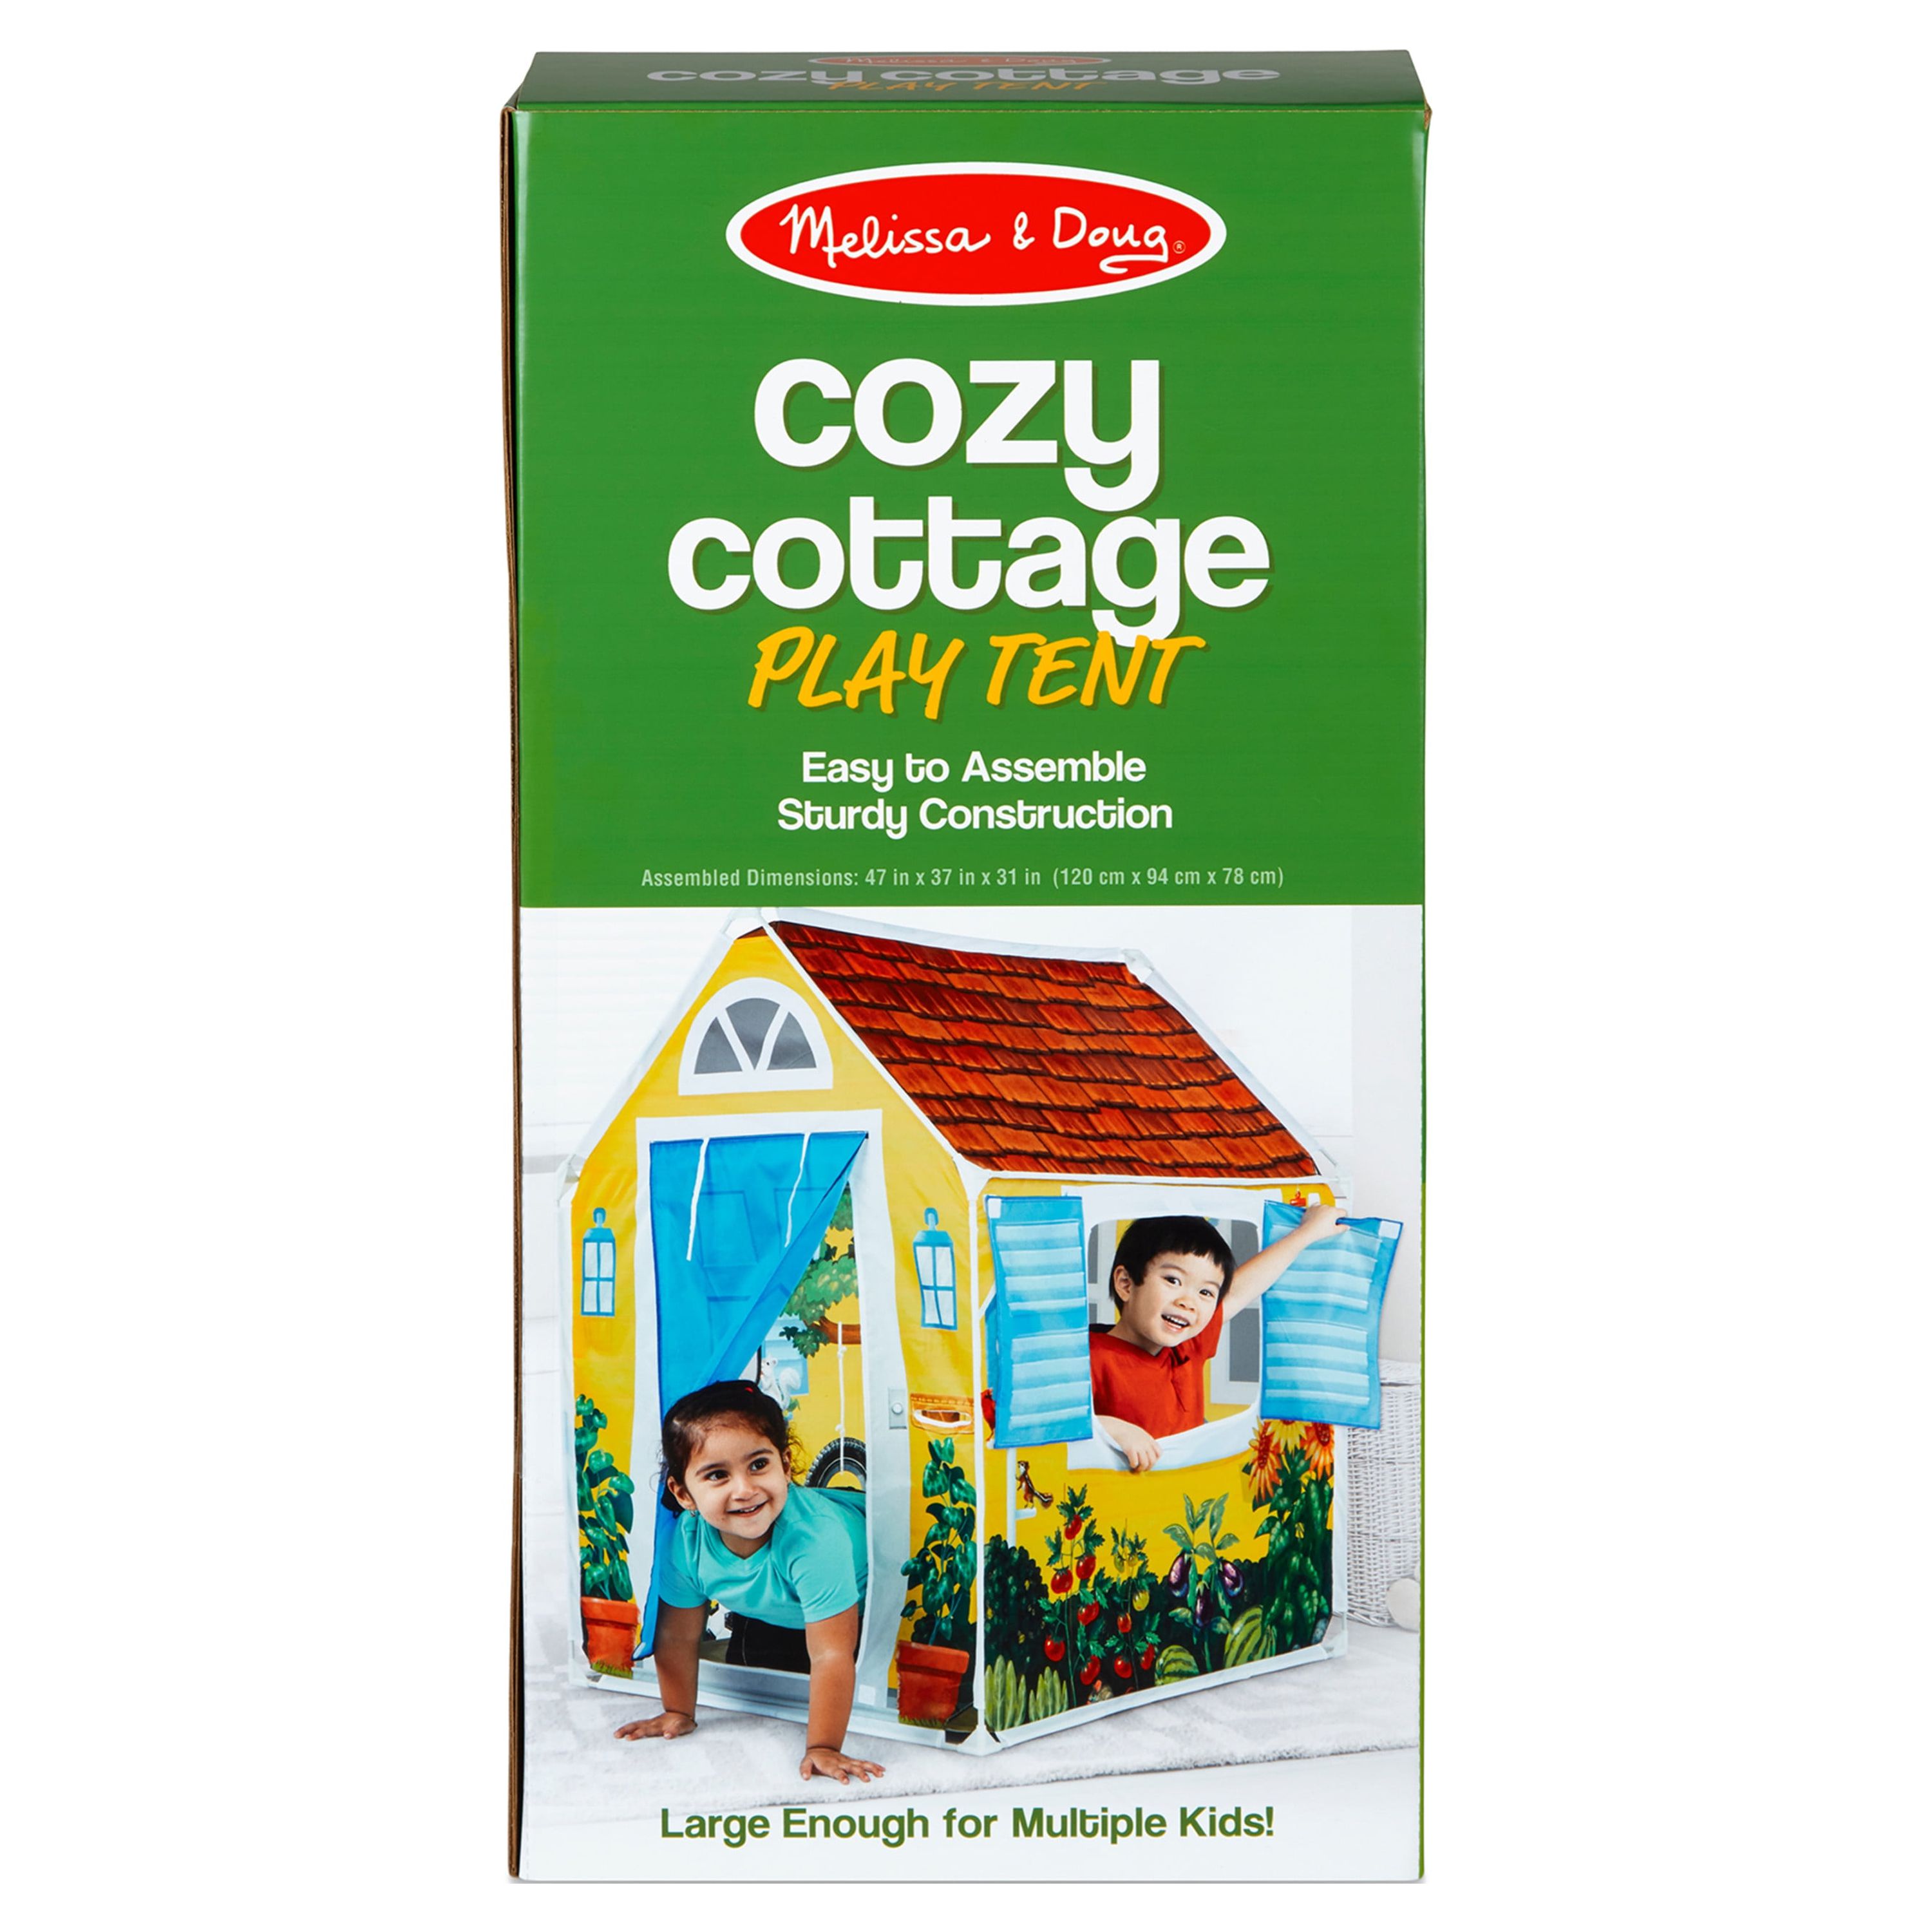 Melissa & Doug Cozy Cottage Fabric Play Tent and Storage Tote - image 3 of 9